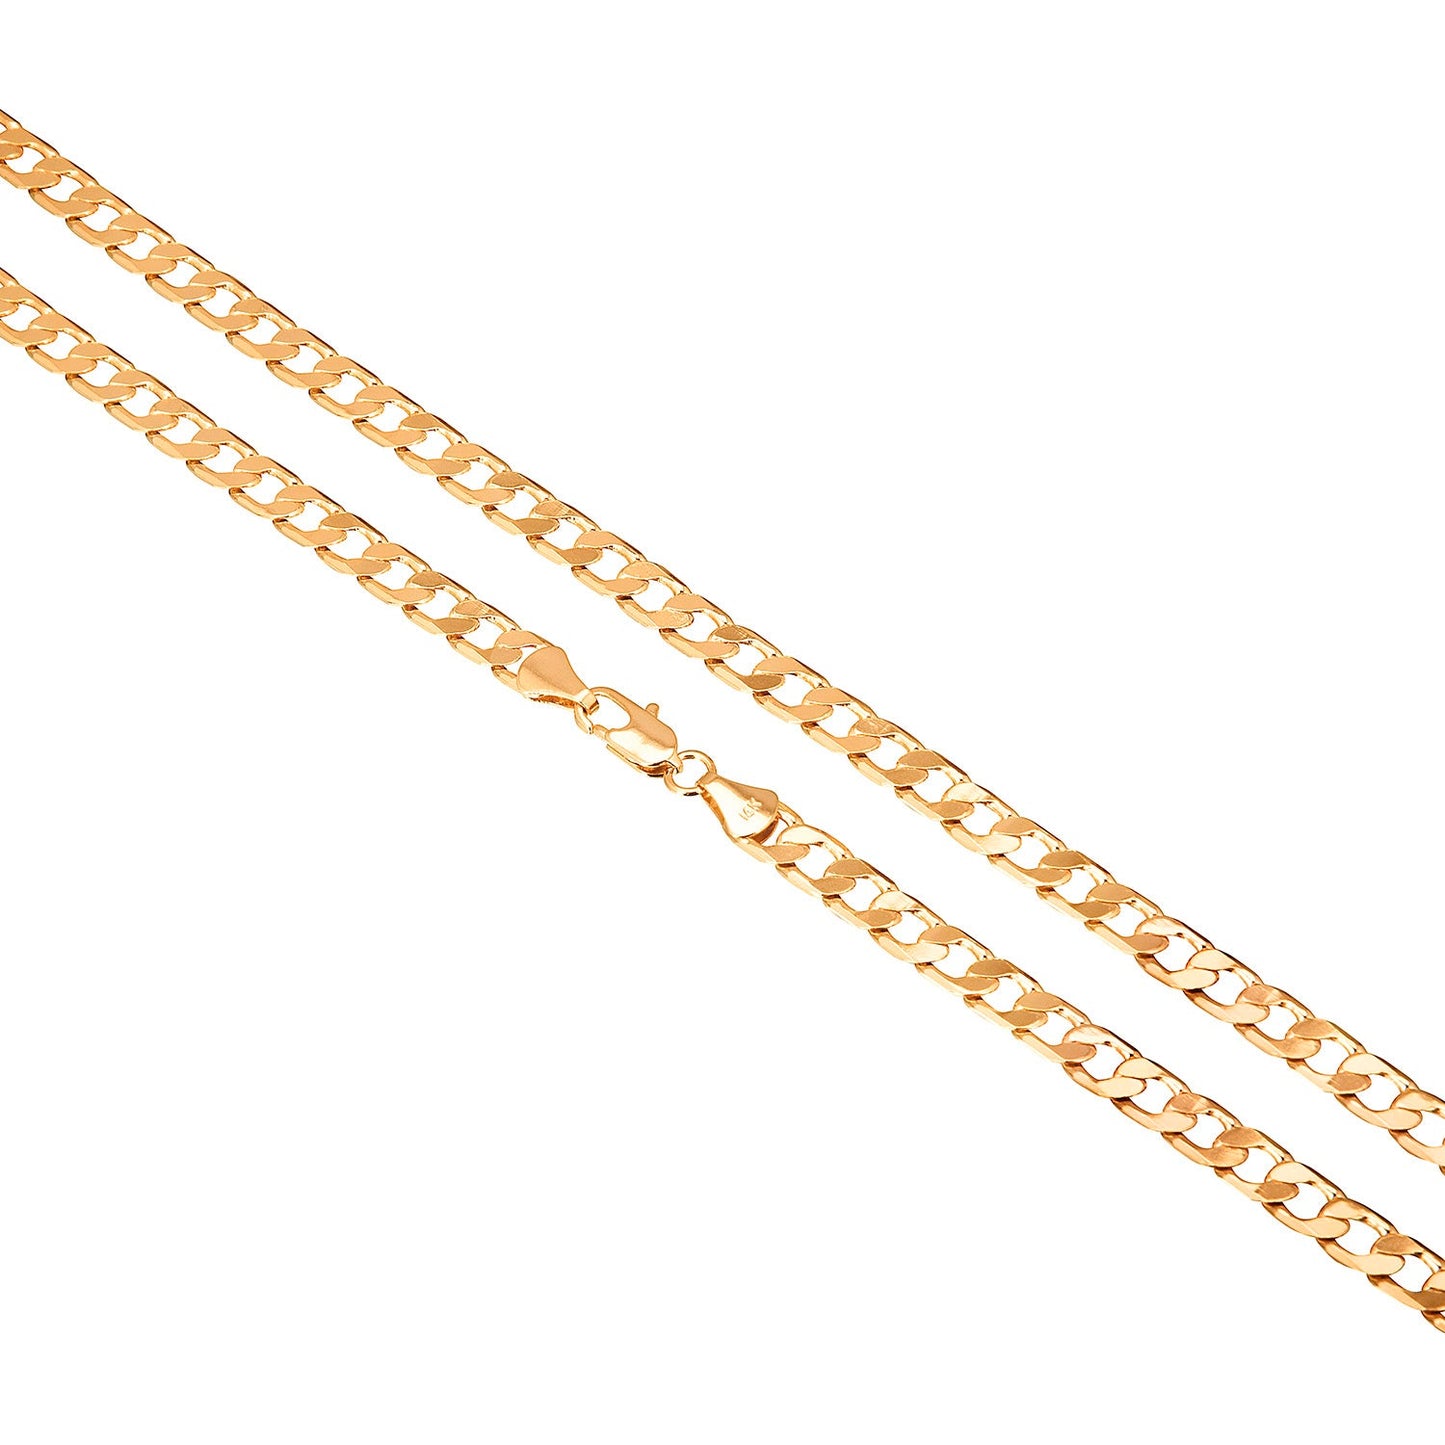 24K 24 inches Gold Plated Imported Quality Cuban Link Chain for Men & Women (SJ_2186) - Shining Jewel